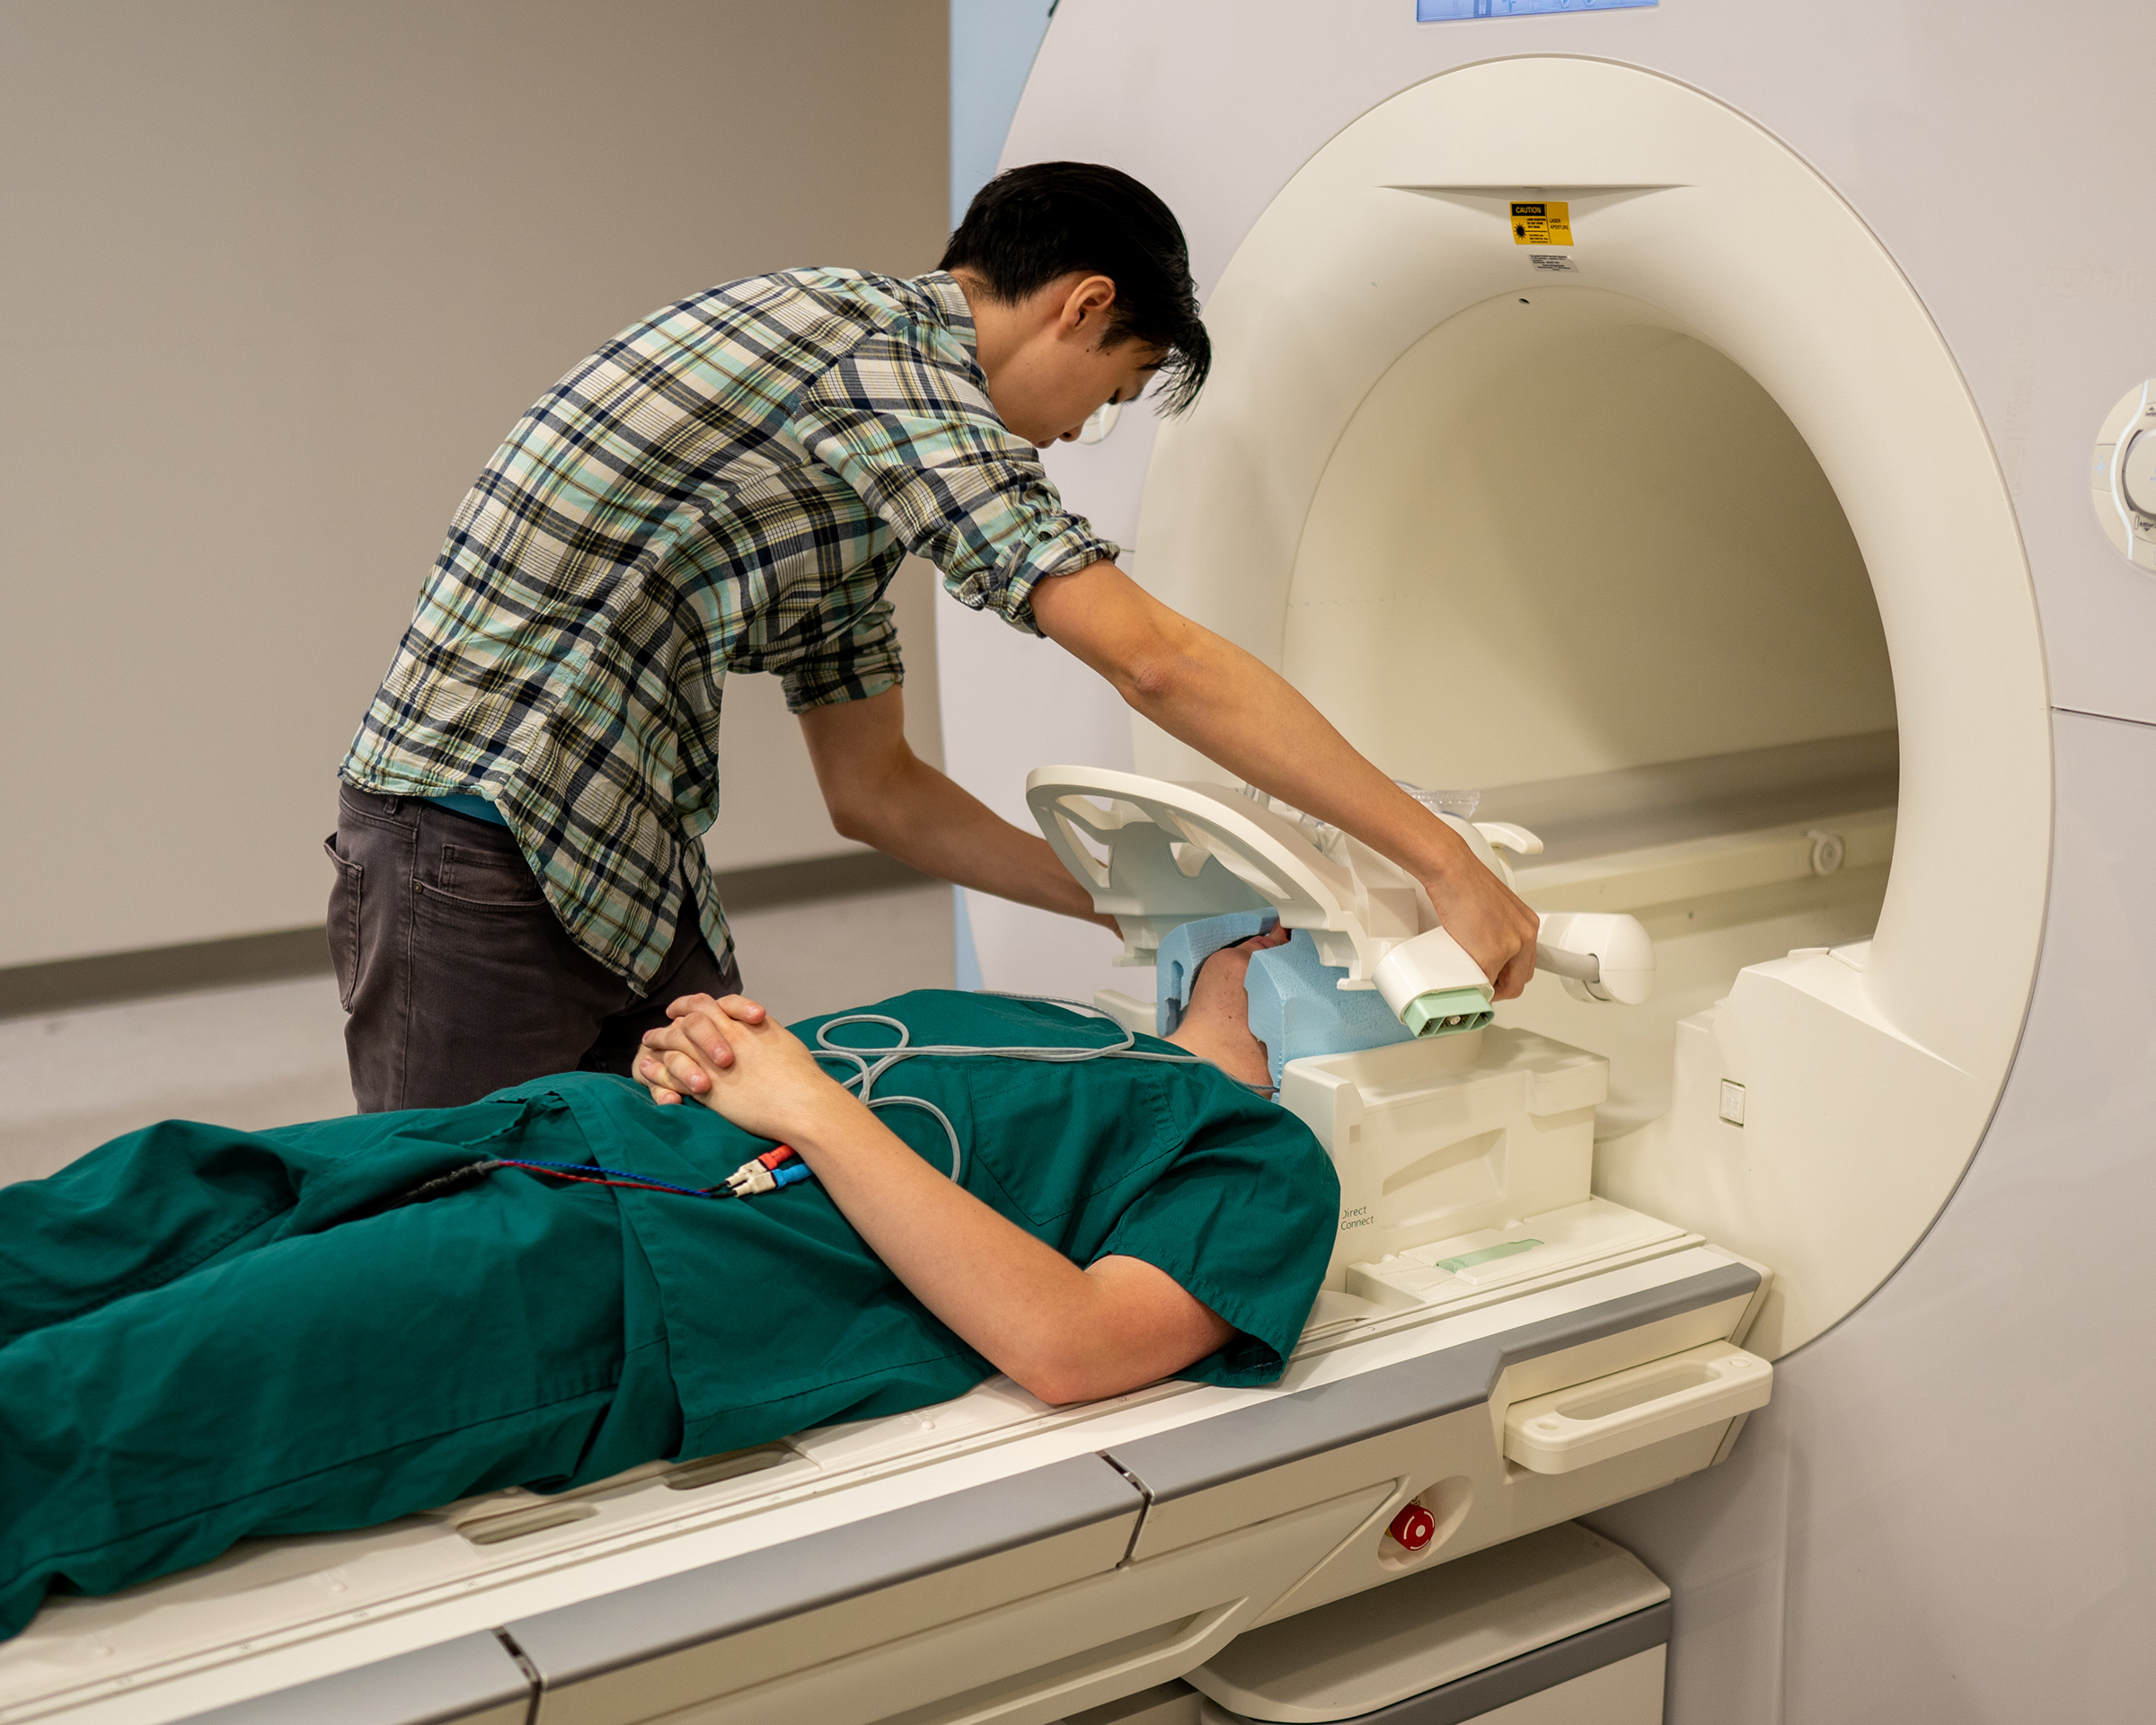 A man places head gear on a participant preparing to go into an MRI scanner